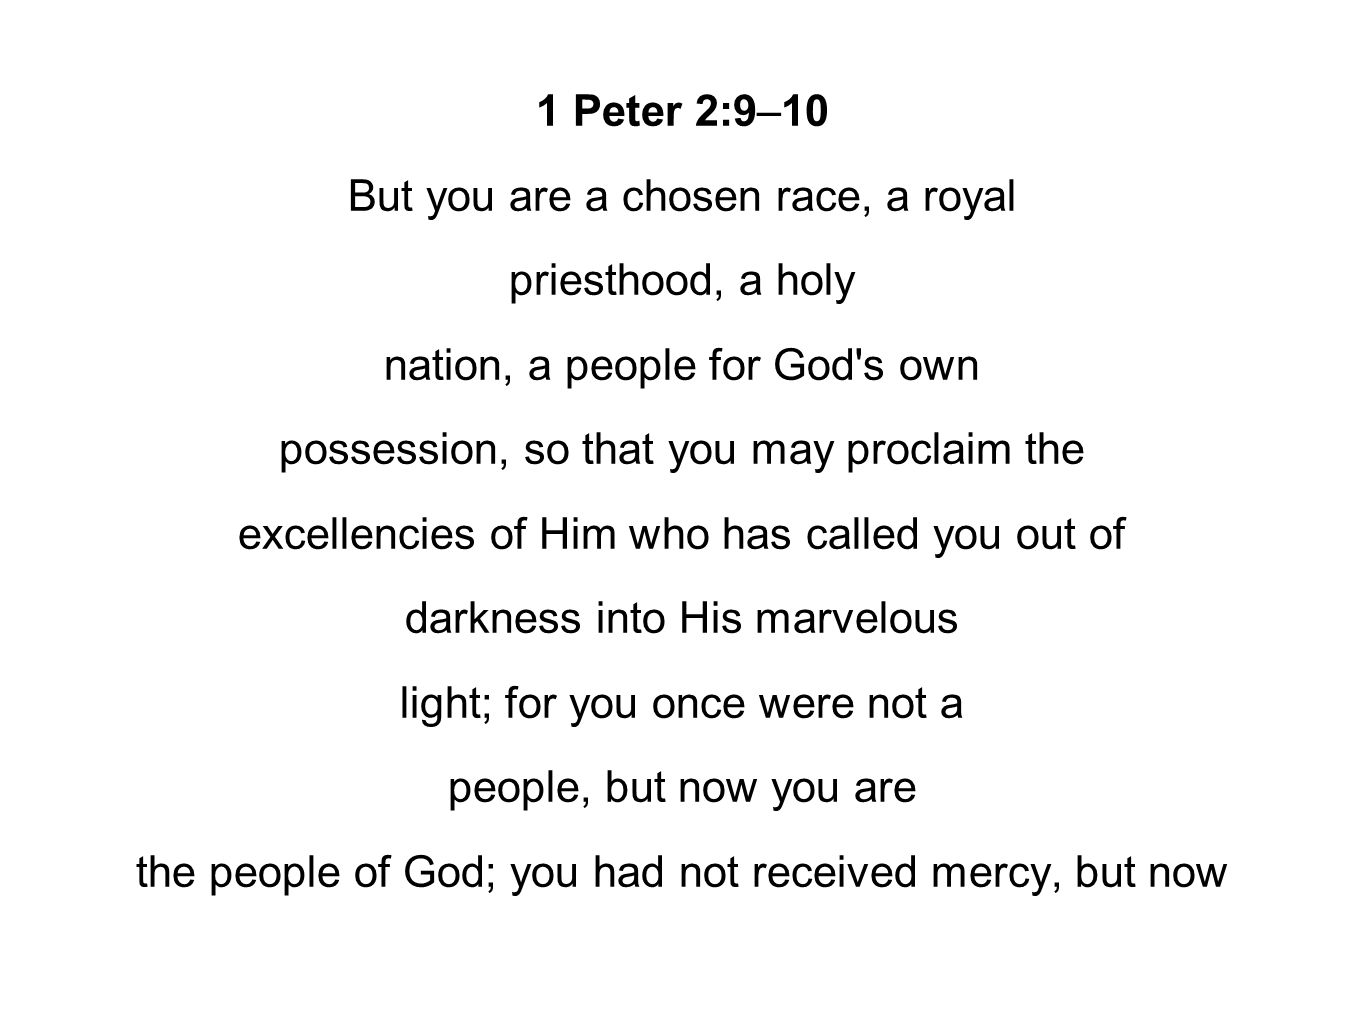 1 Peter 2:9–10 But you are a chosen race, a royal priesthood, a holy nation, a people for God s own possession, so that you may proclaim the excellencies of Him who has called you out of darkness into His marvelous light; for you once were not a people, but now you are the people of God; you had not received mercy, but now